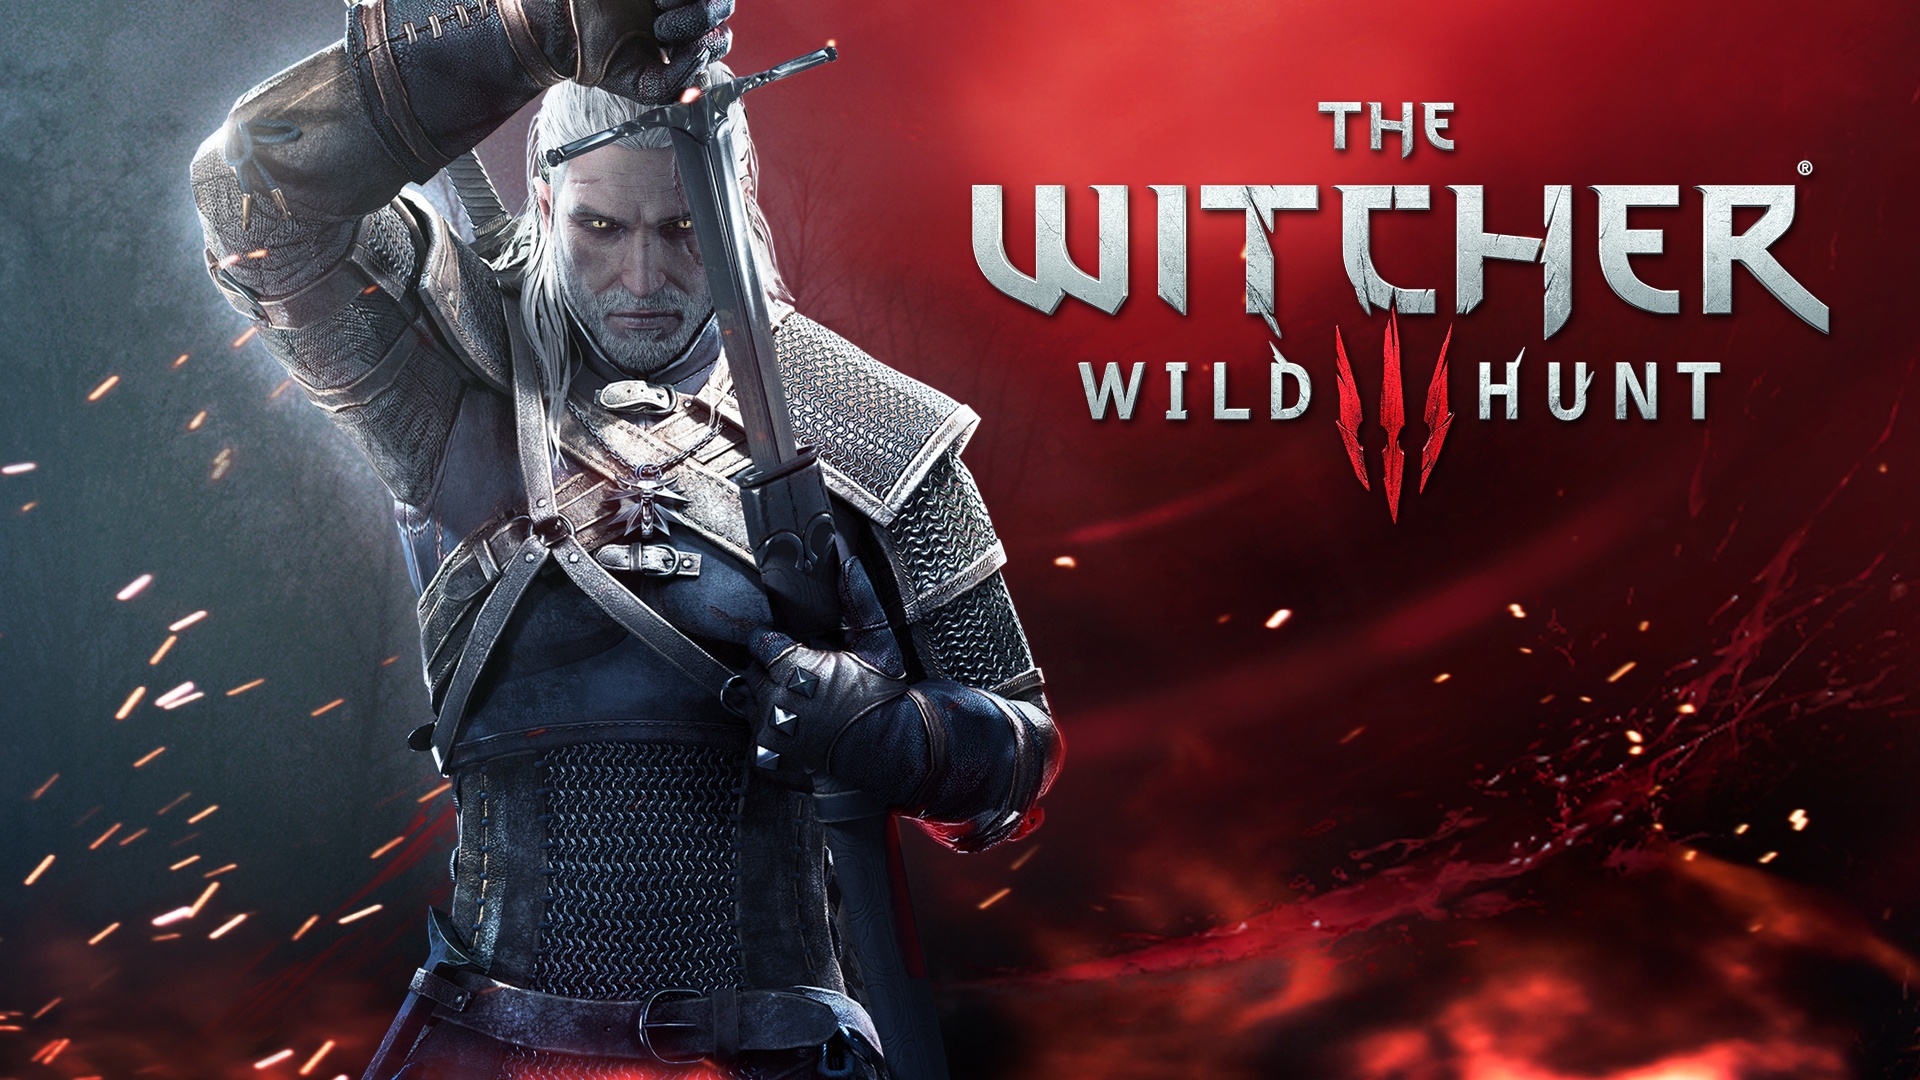 The Witcher Wild Hunt Poster Wallpaper HD With